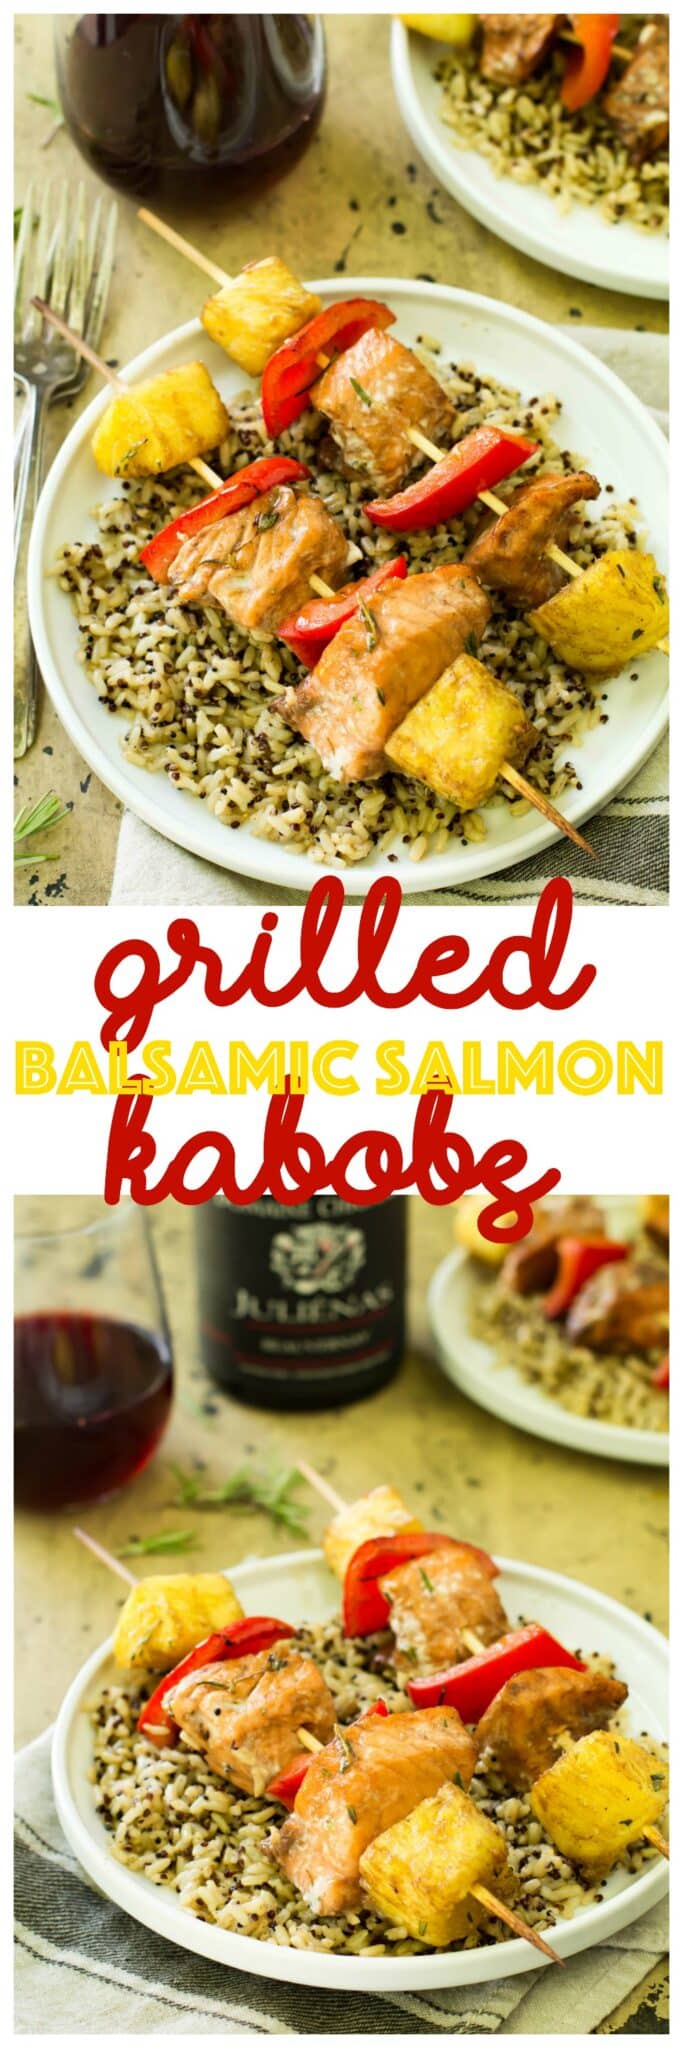 Let’s keep the summer grilling tradition going today with this simple, irresistibly tasty recipe for Grilled Balsamic Salmon Kabobs.